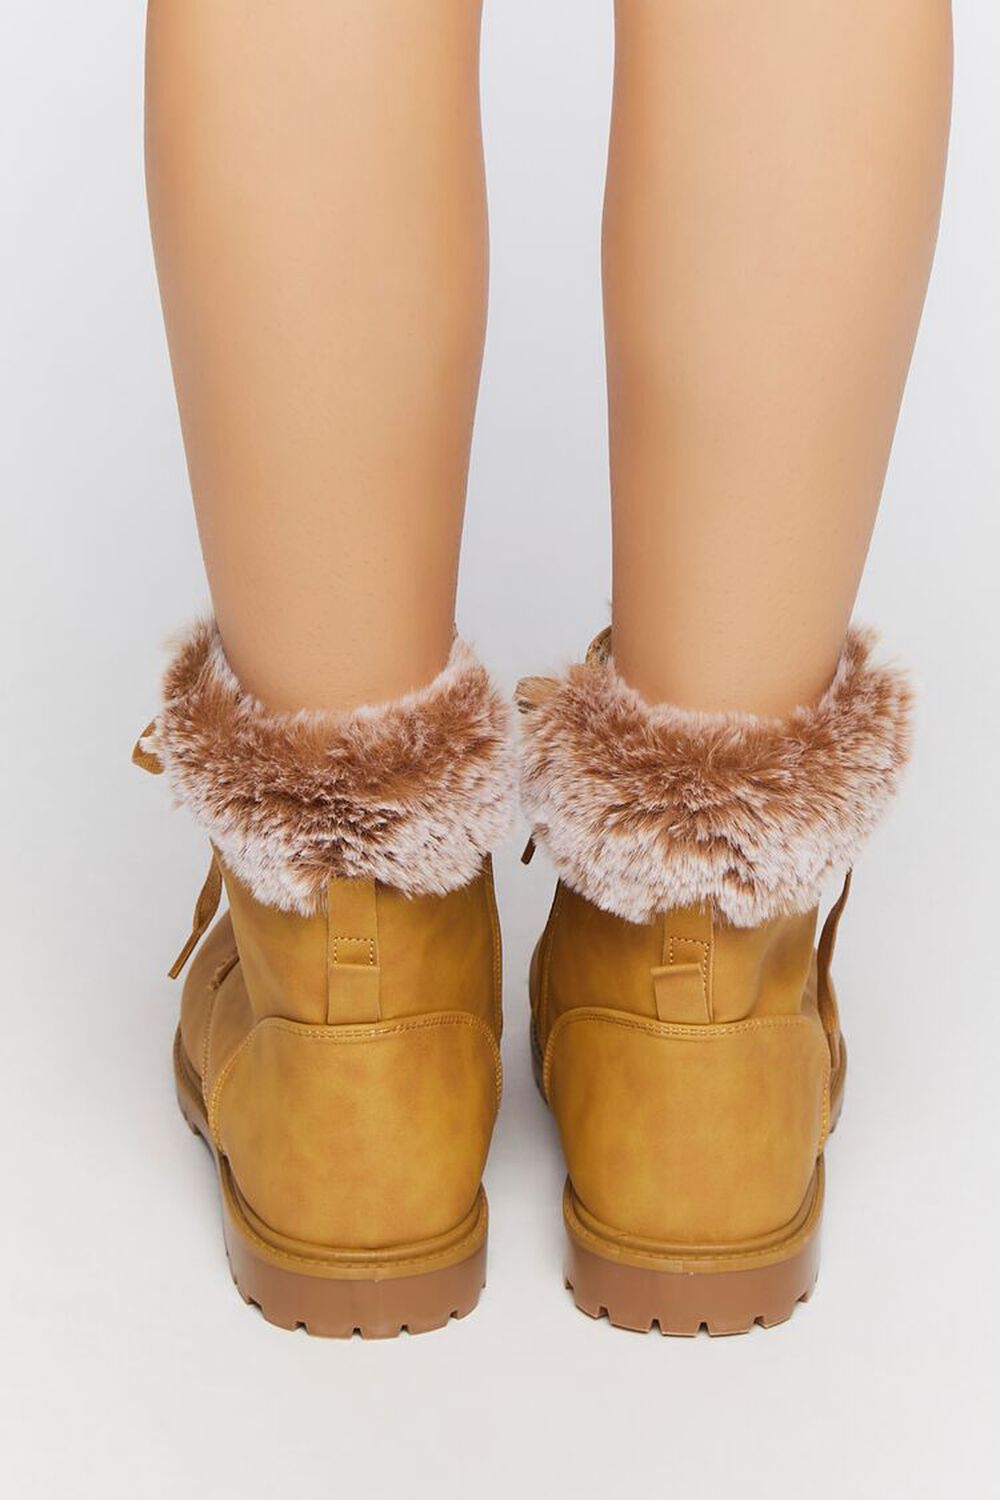 CAMEL Faux Fur-Lined Ankle Booties, image 3